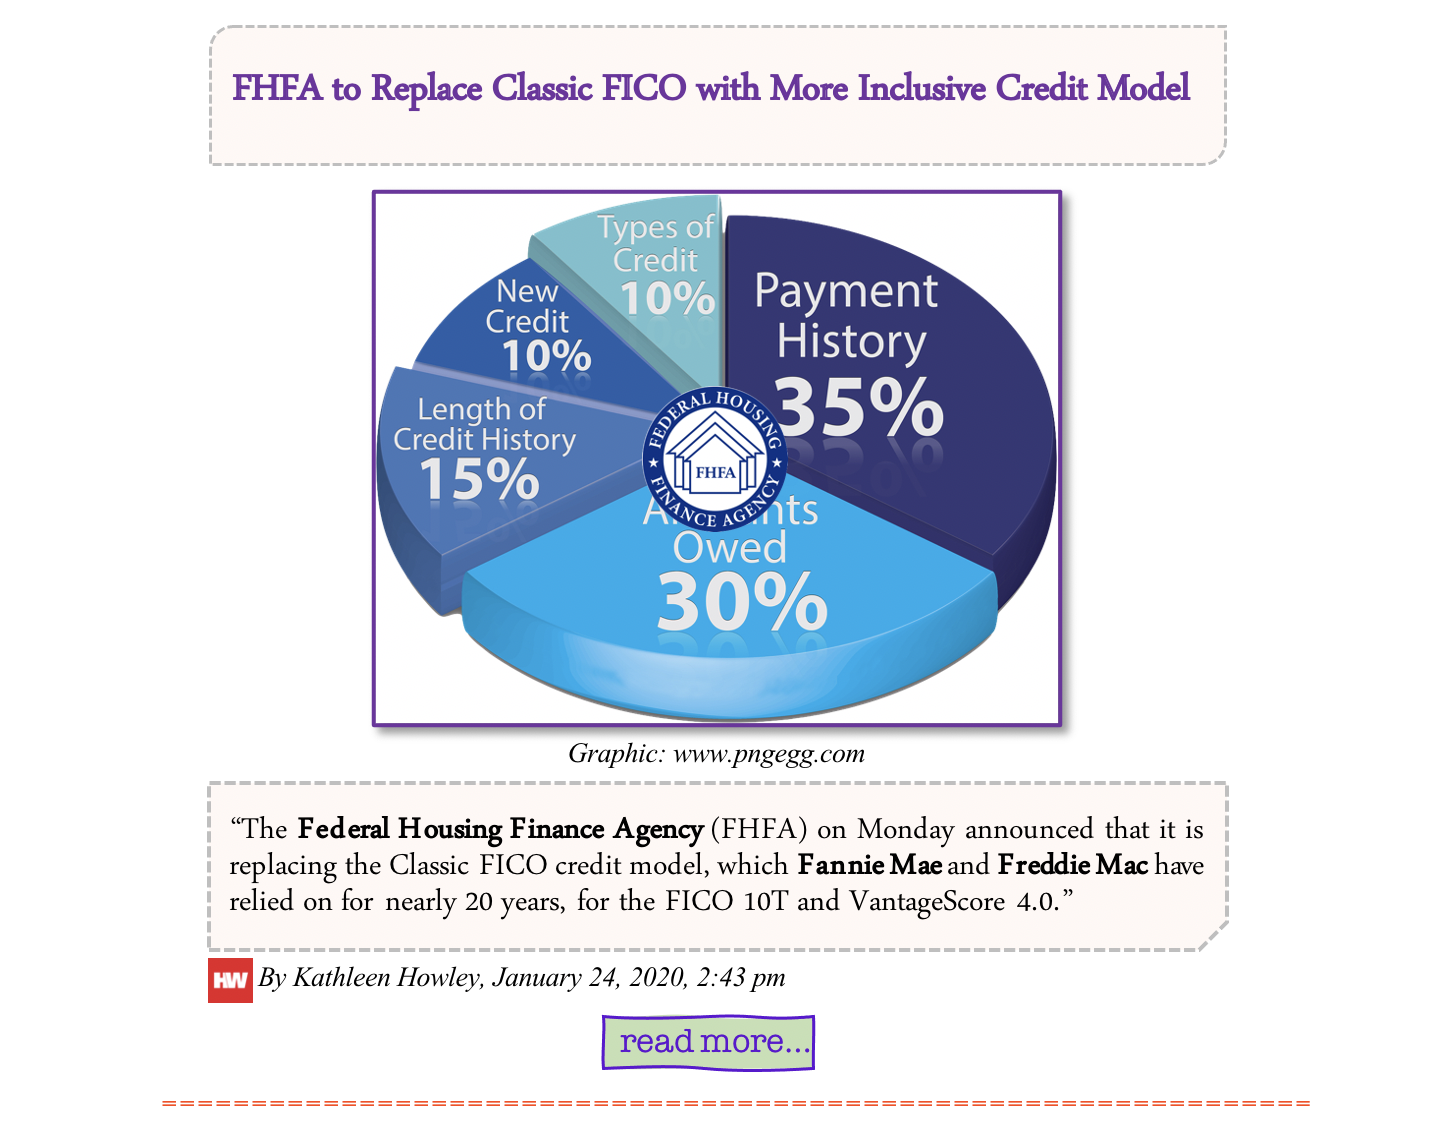 Pie chart of componants of credit score. FHFA to replace Classic FICO with more inclusive credit model 